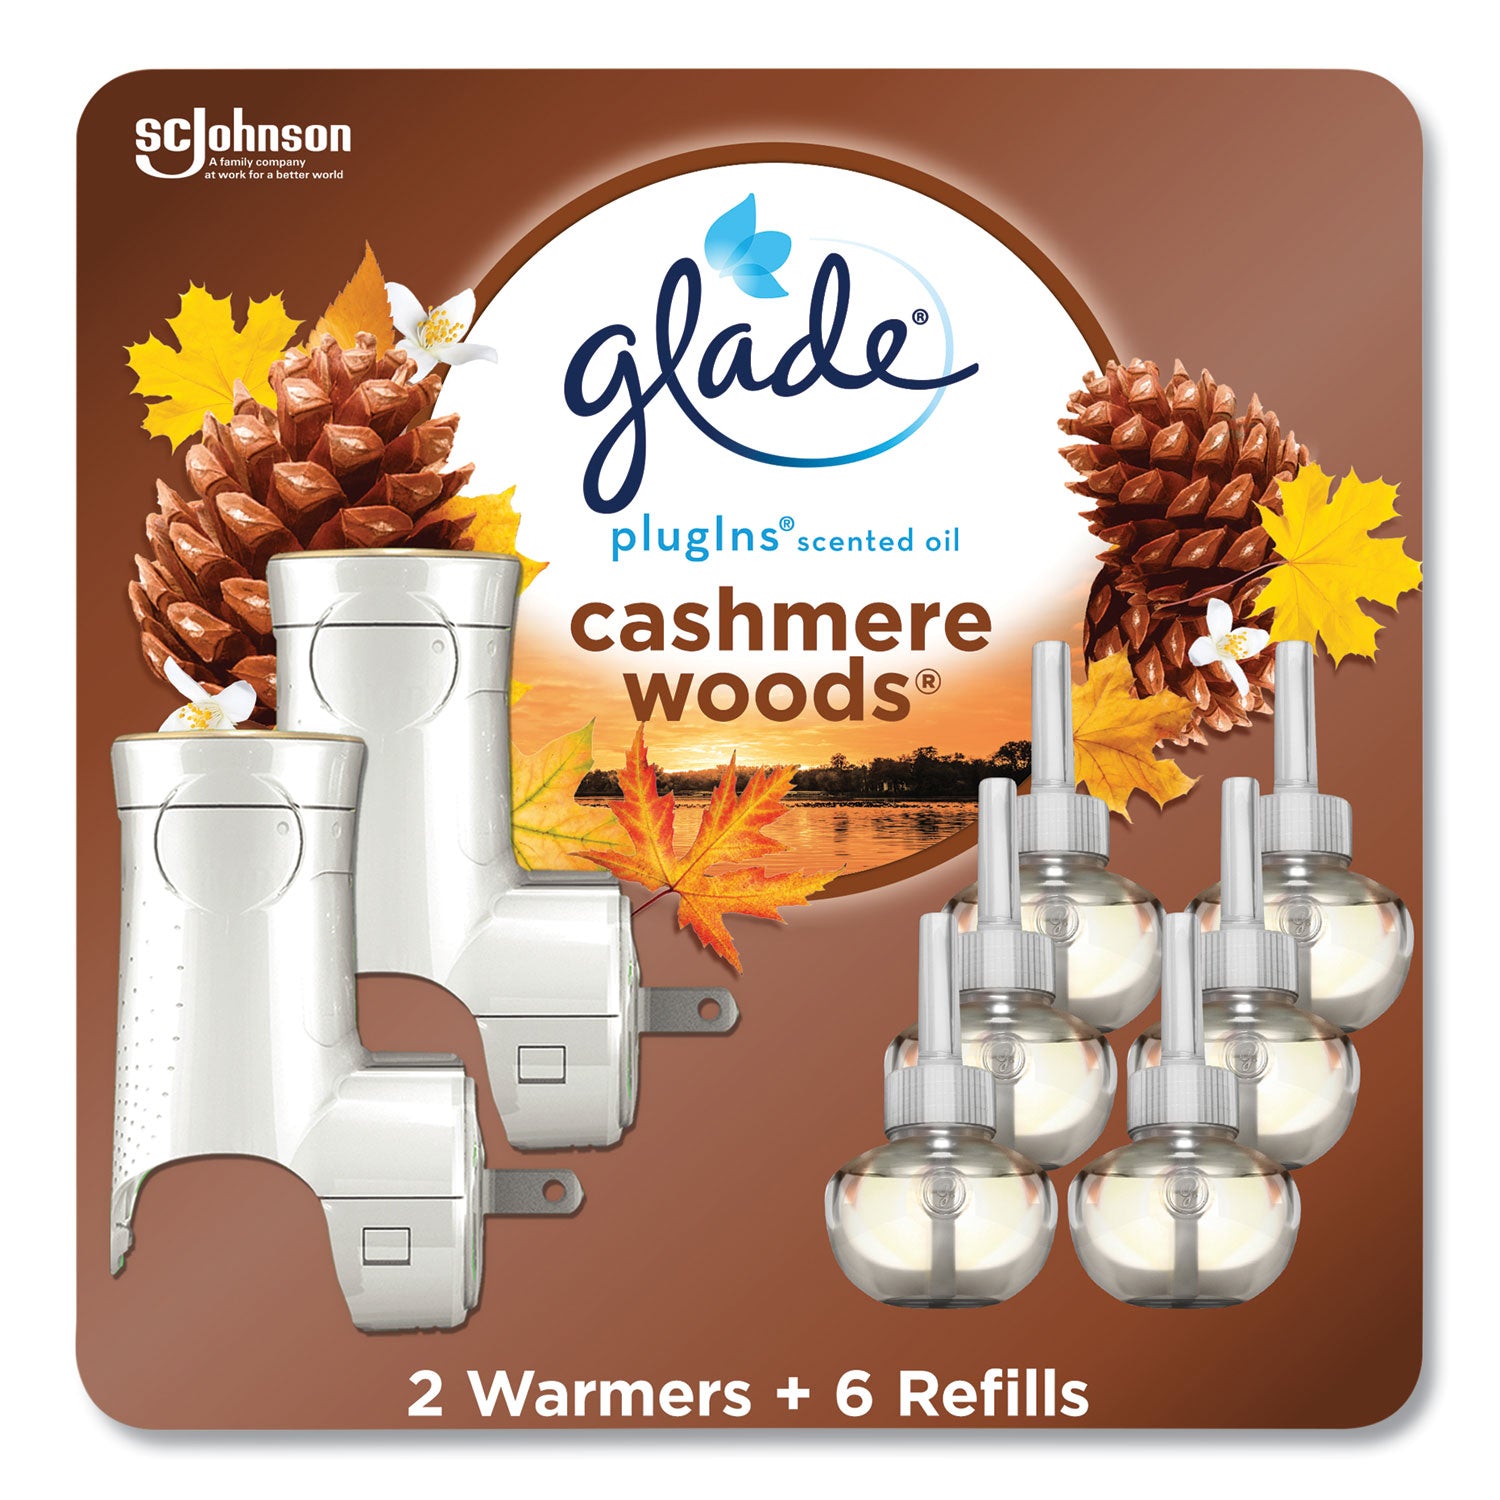 plugin-scented-oil-cashmere-woods-067-oz-2-warmers-and-6-refills-pack_sjn323015 - 2